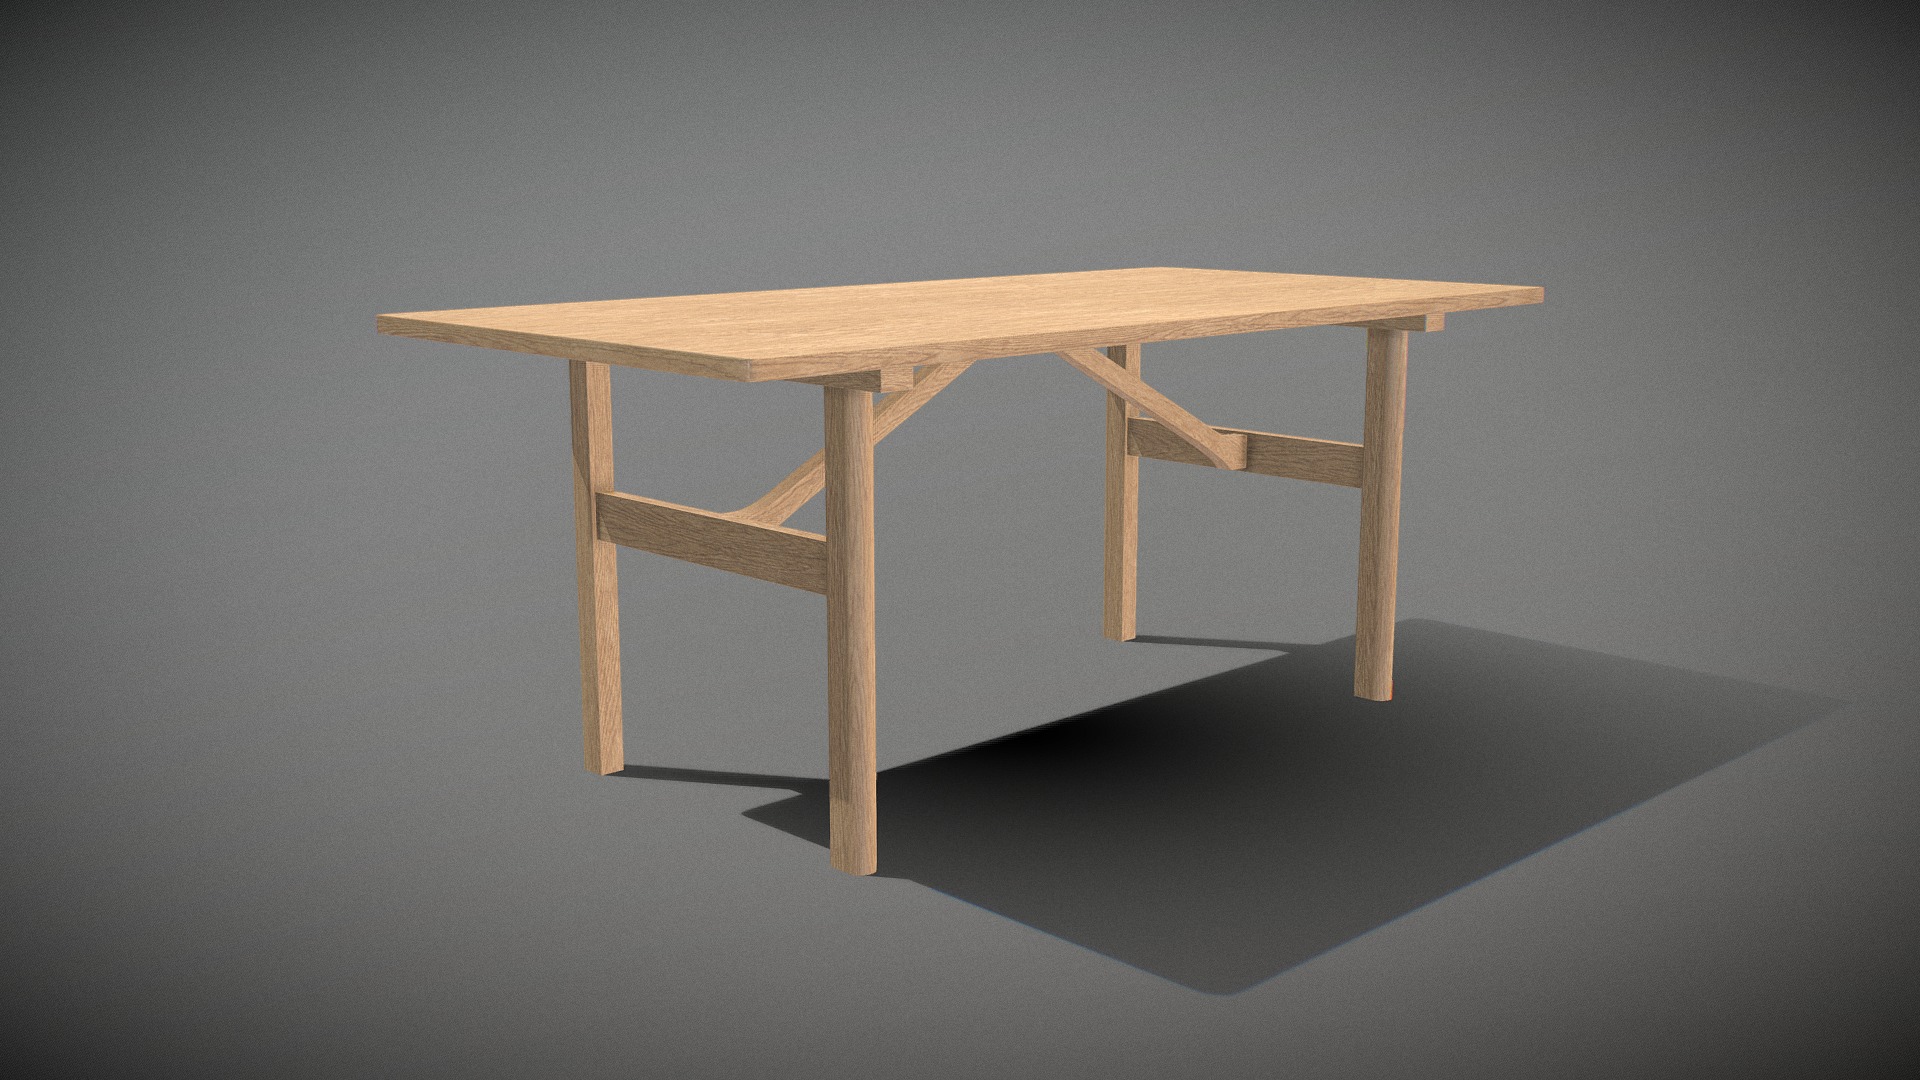 3D model Mogensen Table 6284-oak oil treated - This is a 3D model of the Mogensen Table 6284-oak oil treated. The 3D model is about a wooden table with legs.